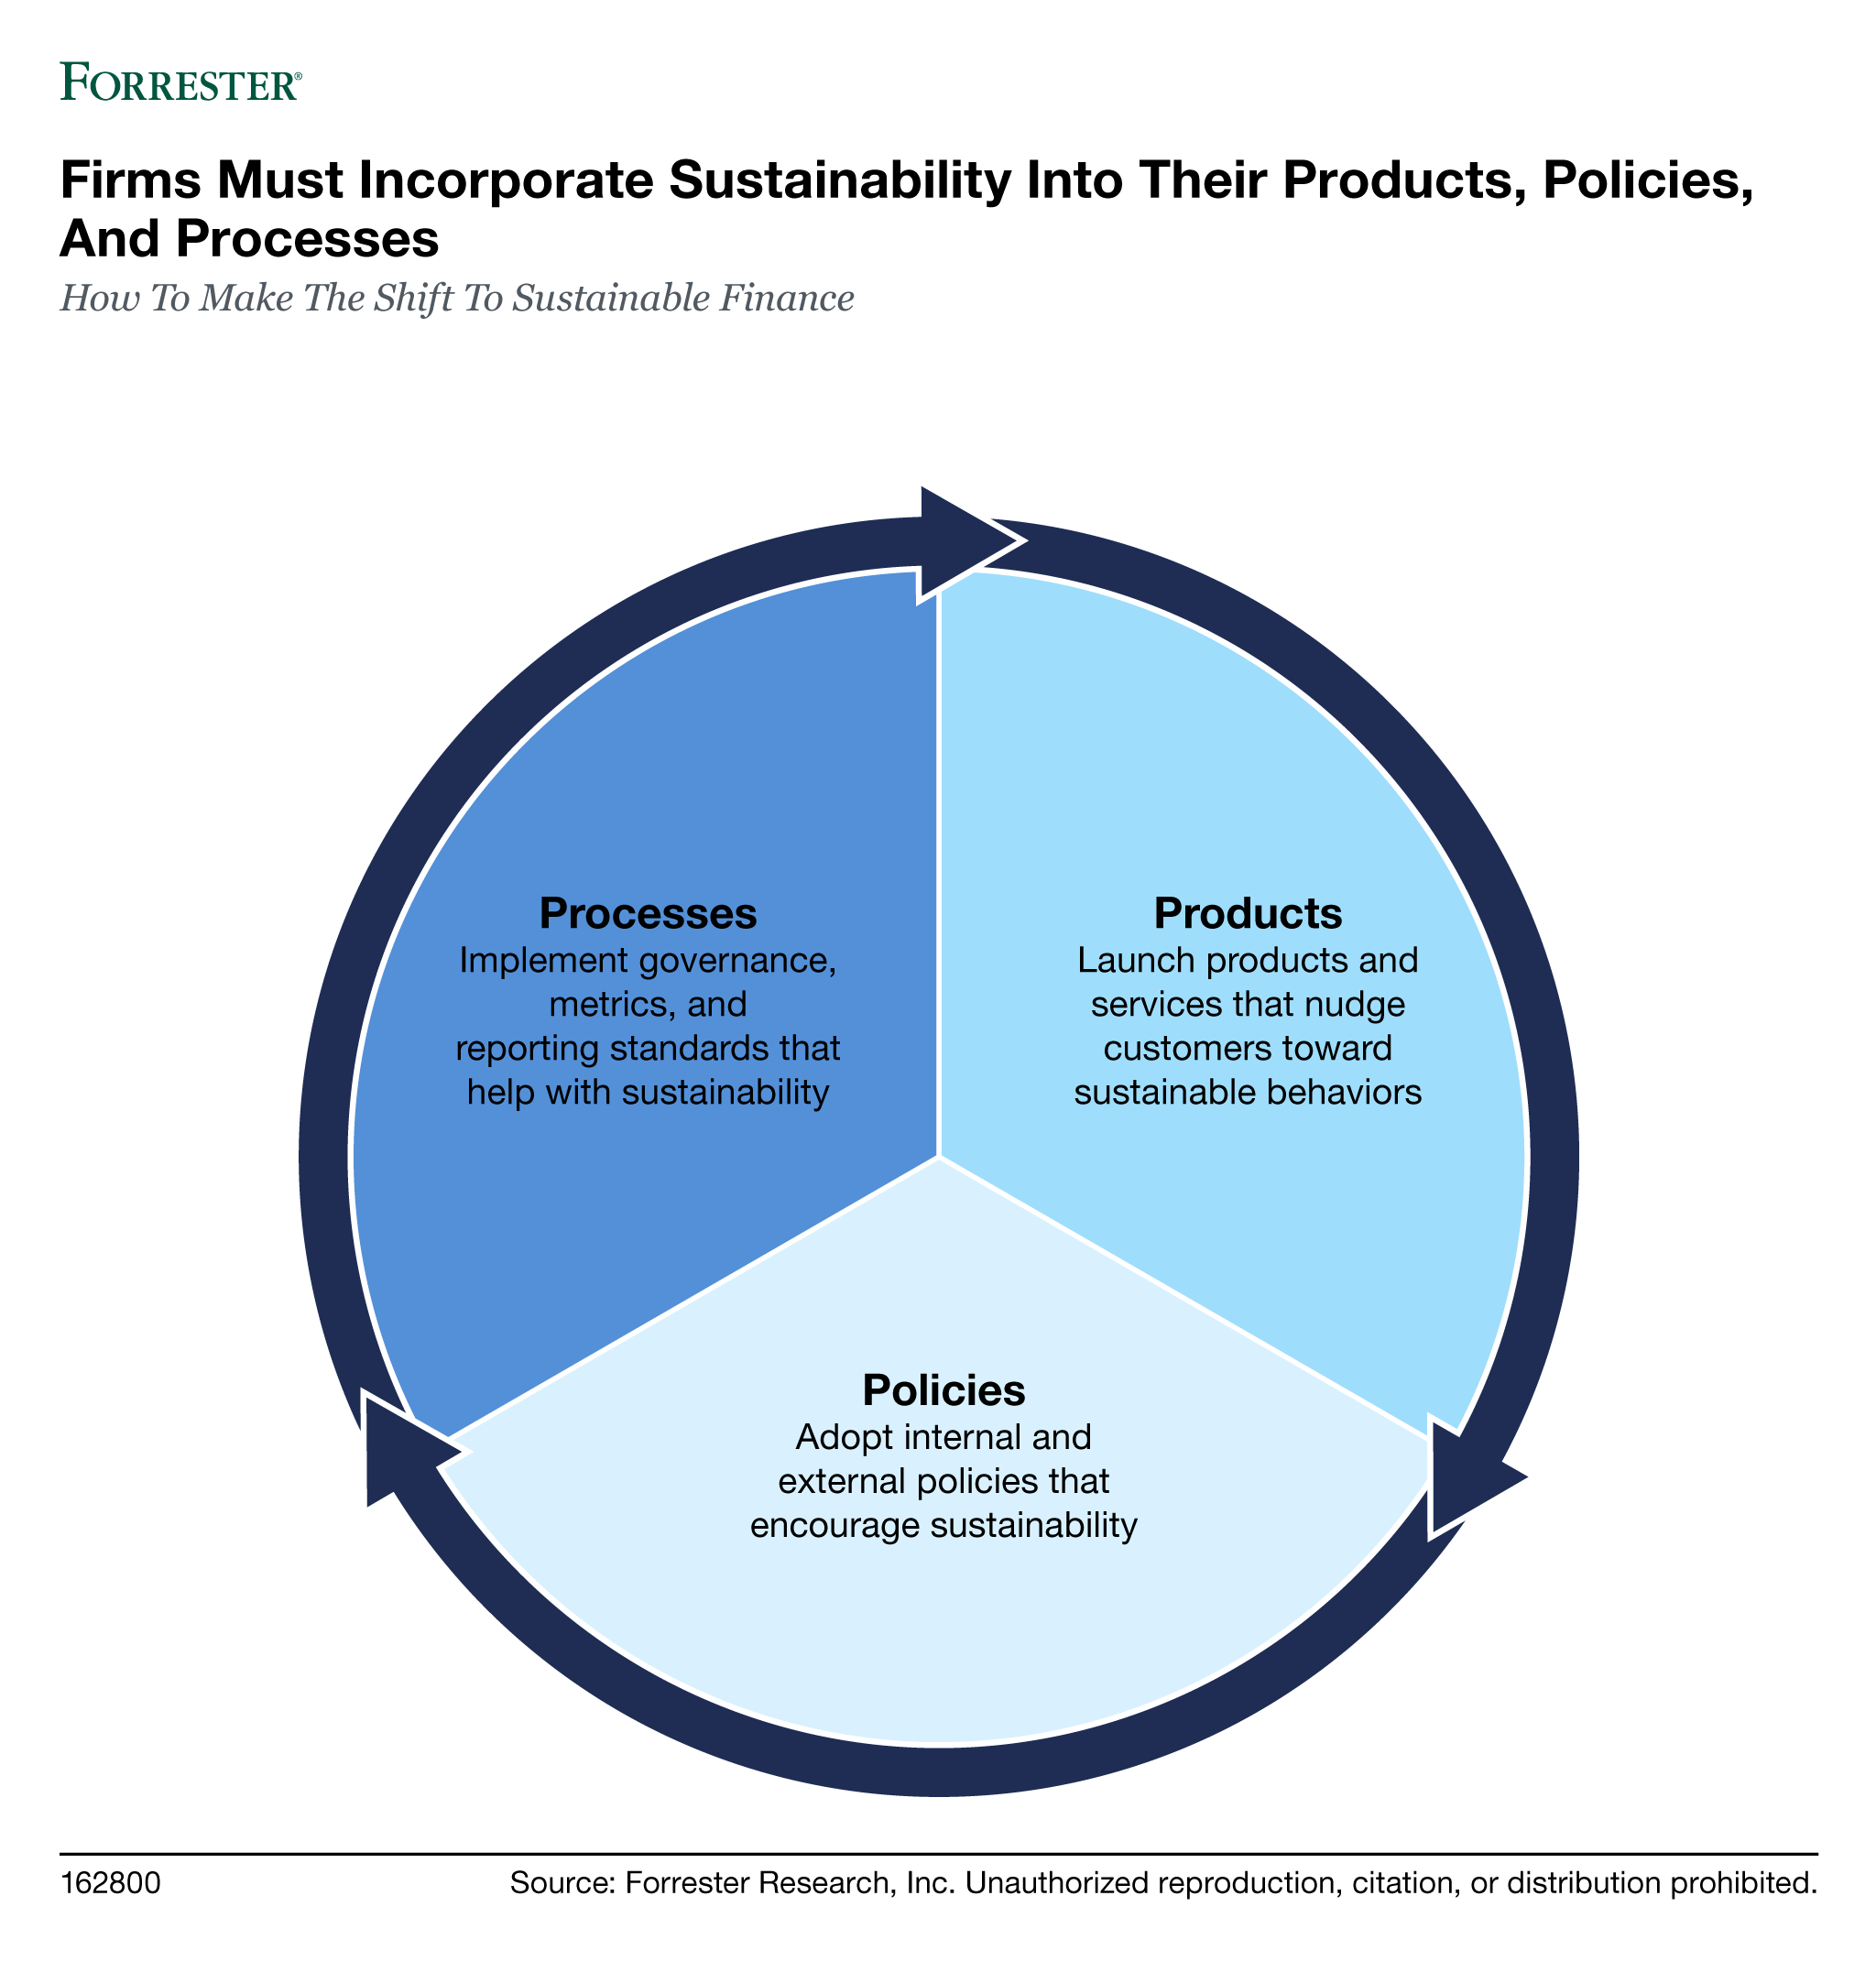 Firms must incorporate sustainability in their products, policies, and processes